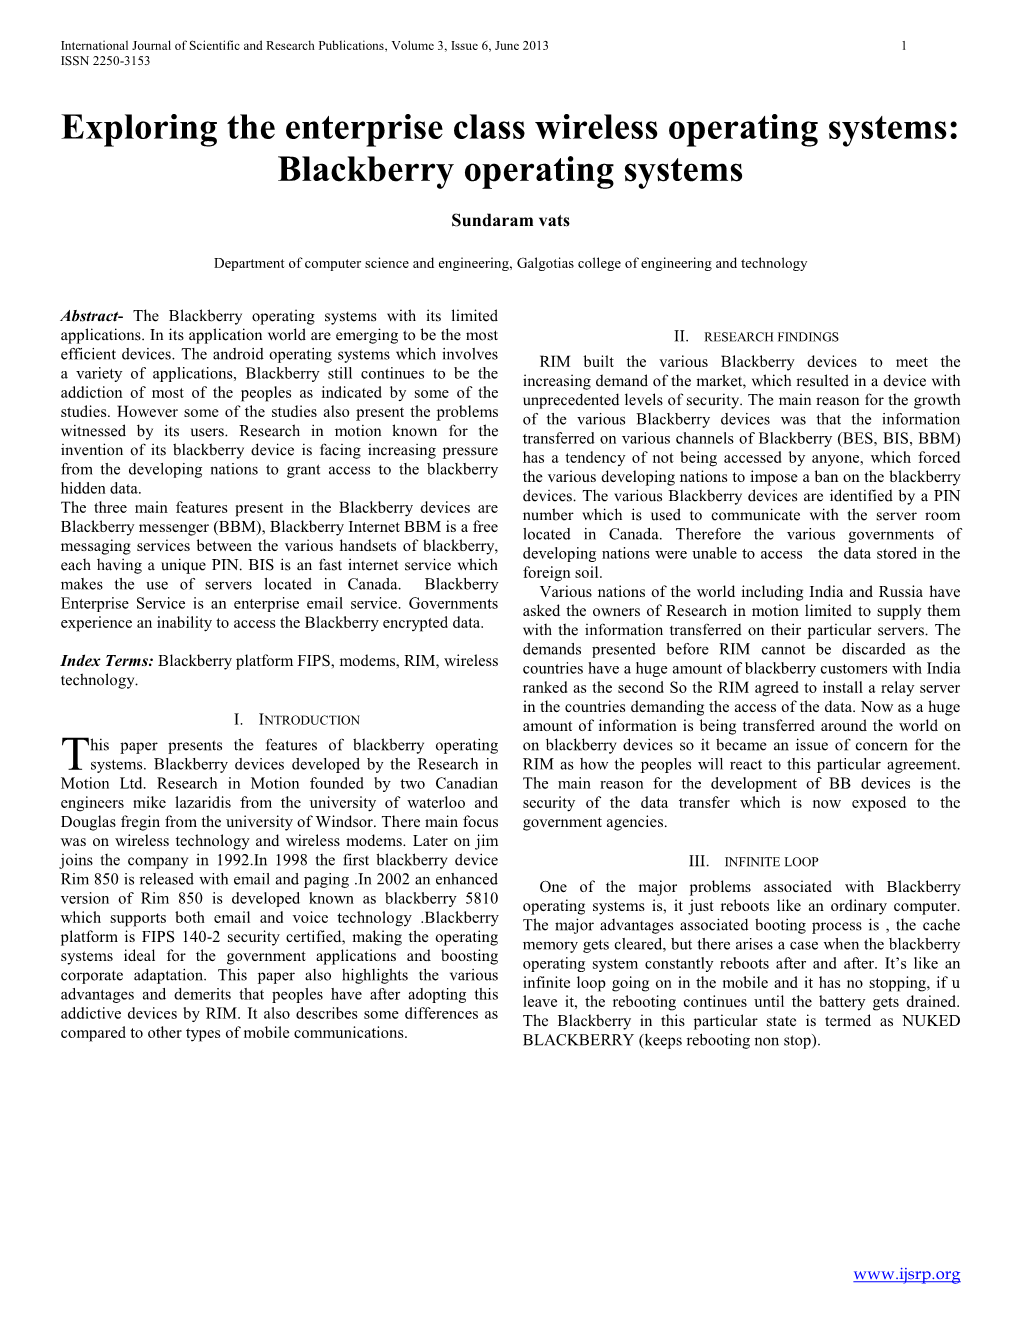 Exploring the Enterprise Class Wireless Operating Systems: Blackberry Operating Systems